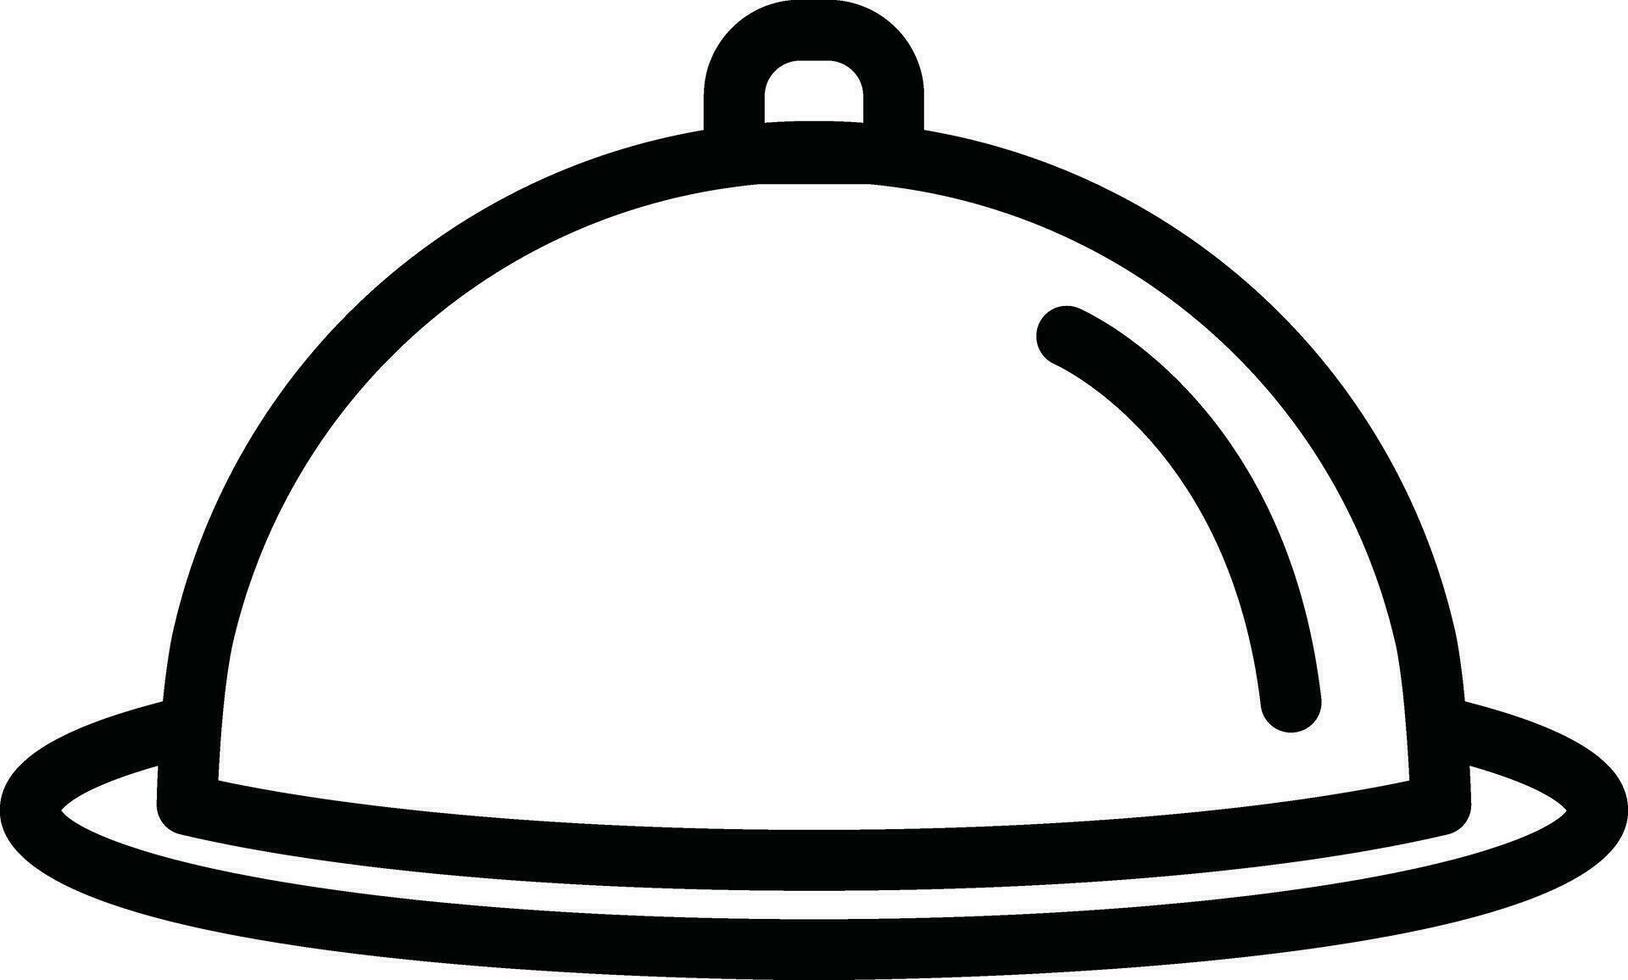 Serving Tray or Cloche icon in line art. vector